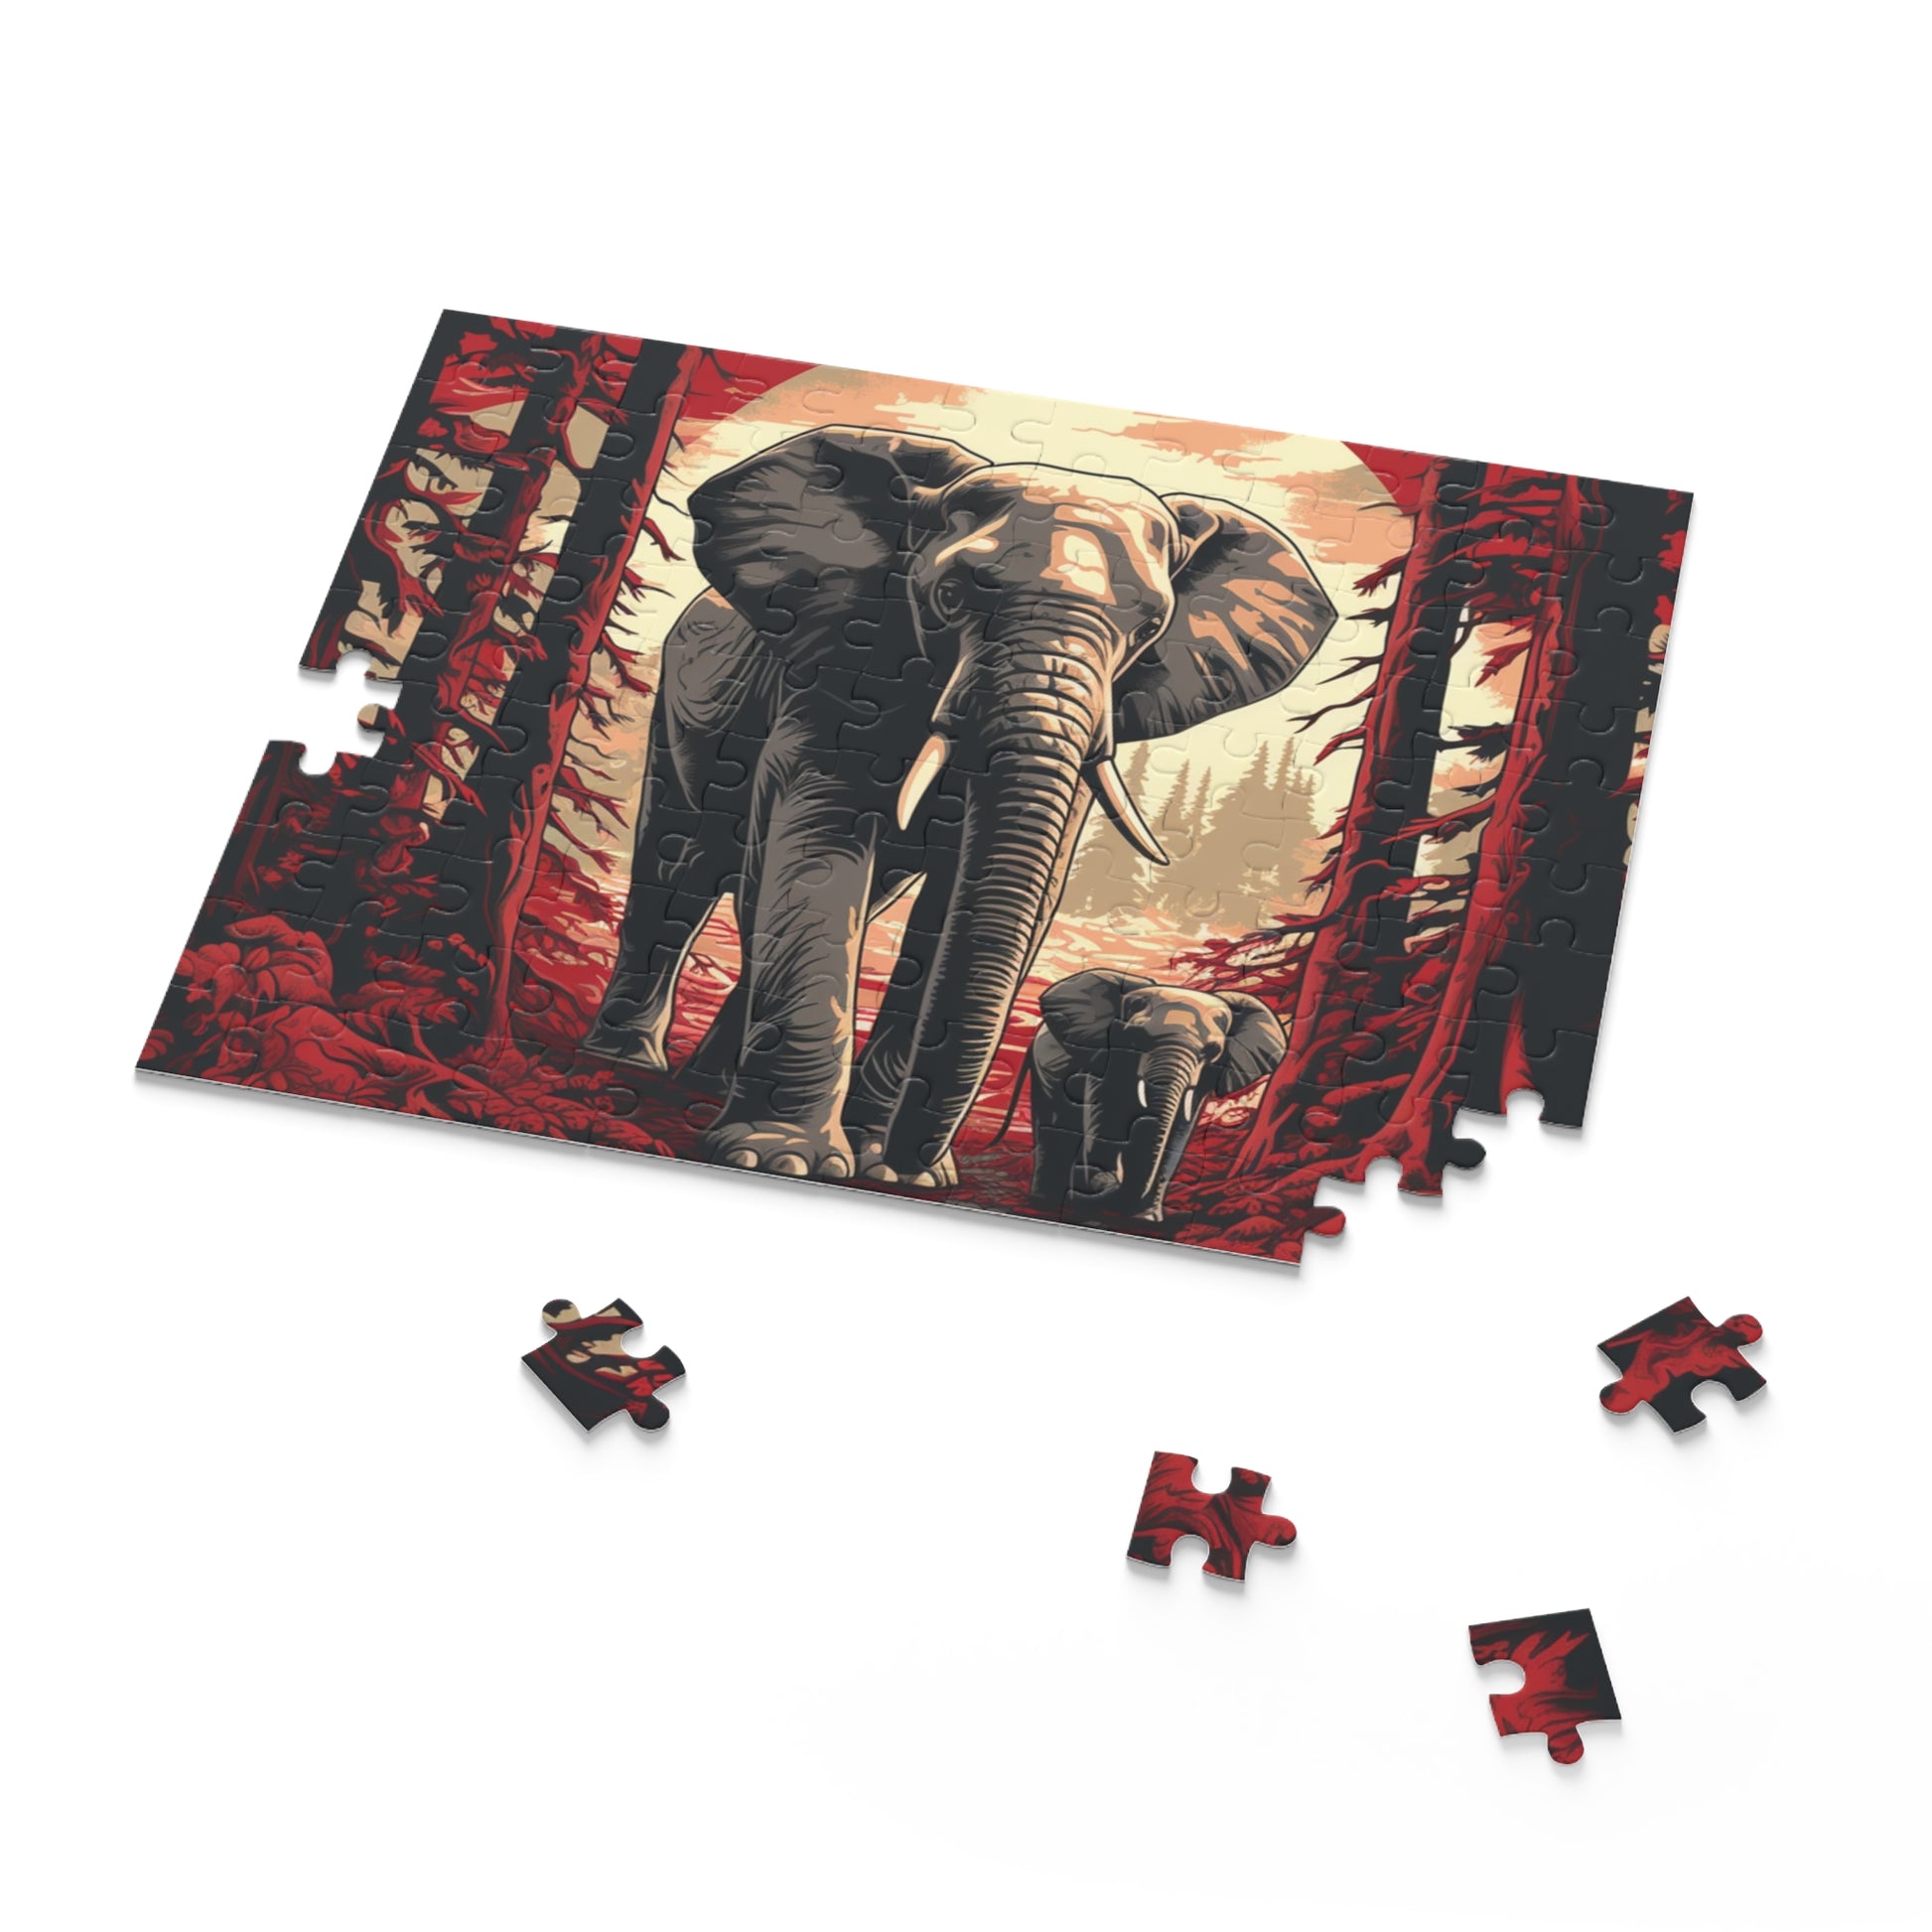 Vibrant Abstract Elephant Jigsaw Puzzle for Boys, Girls, Kids Adult Birthday Business Jigsaw Puzzle Gift for Him Funny Humorous Indoor Outdoor Game Gift For Her Online-7